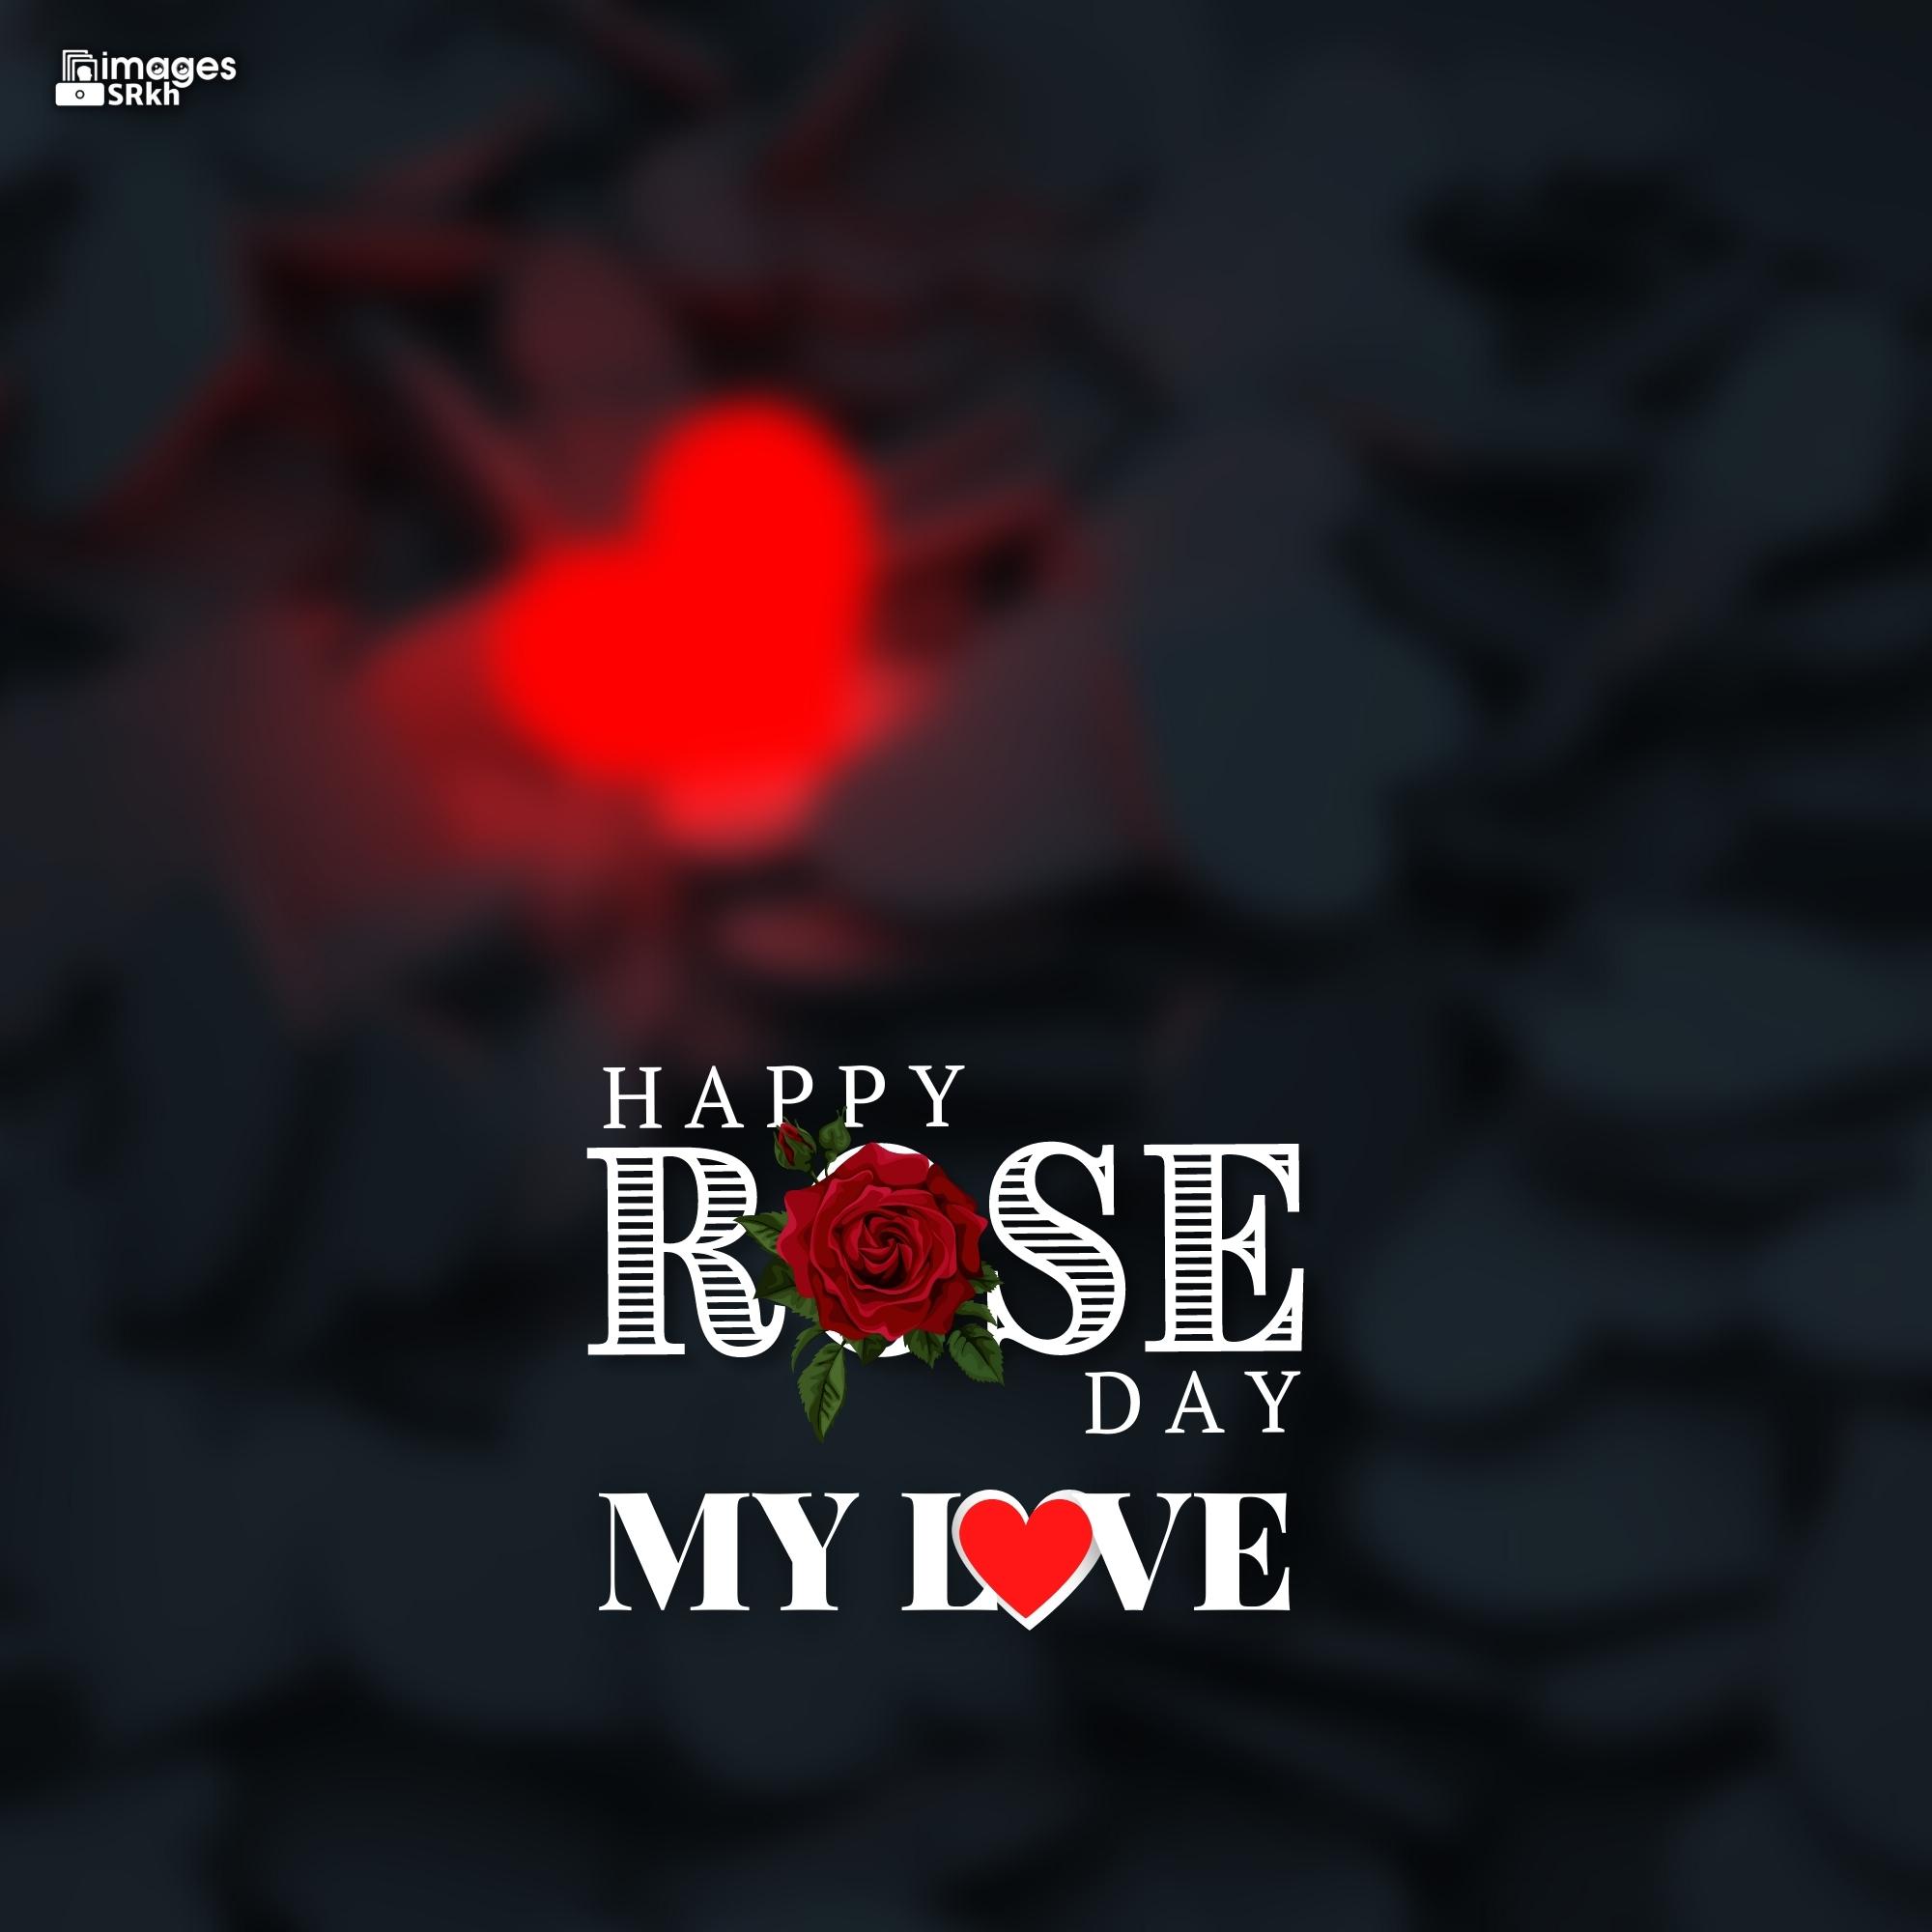 Happy Rose Day My Love (6) | HD IMAGES